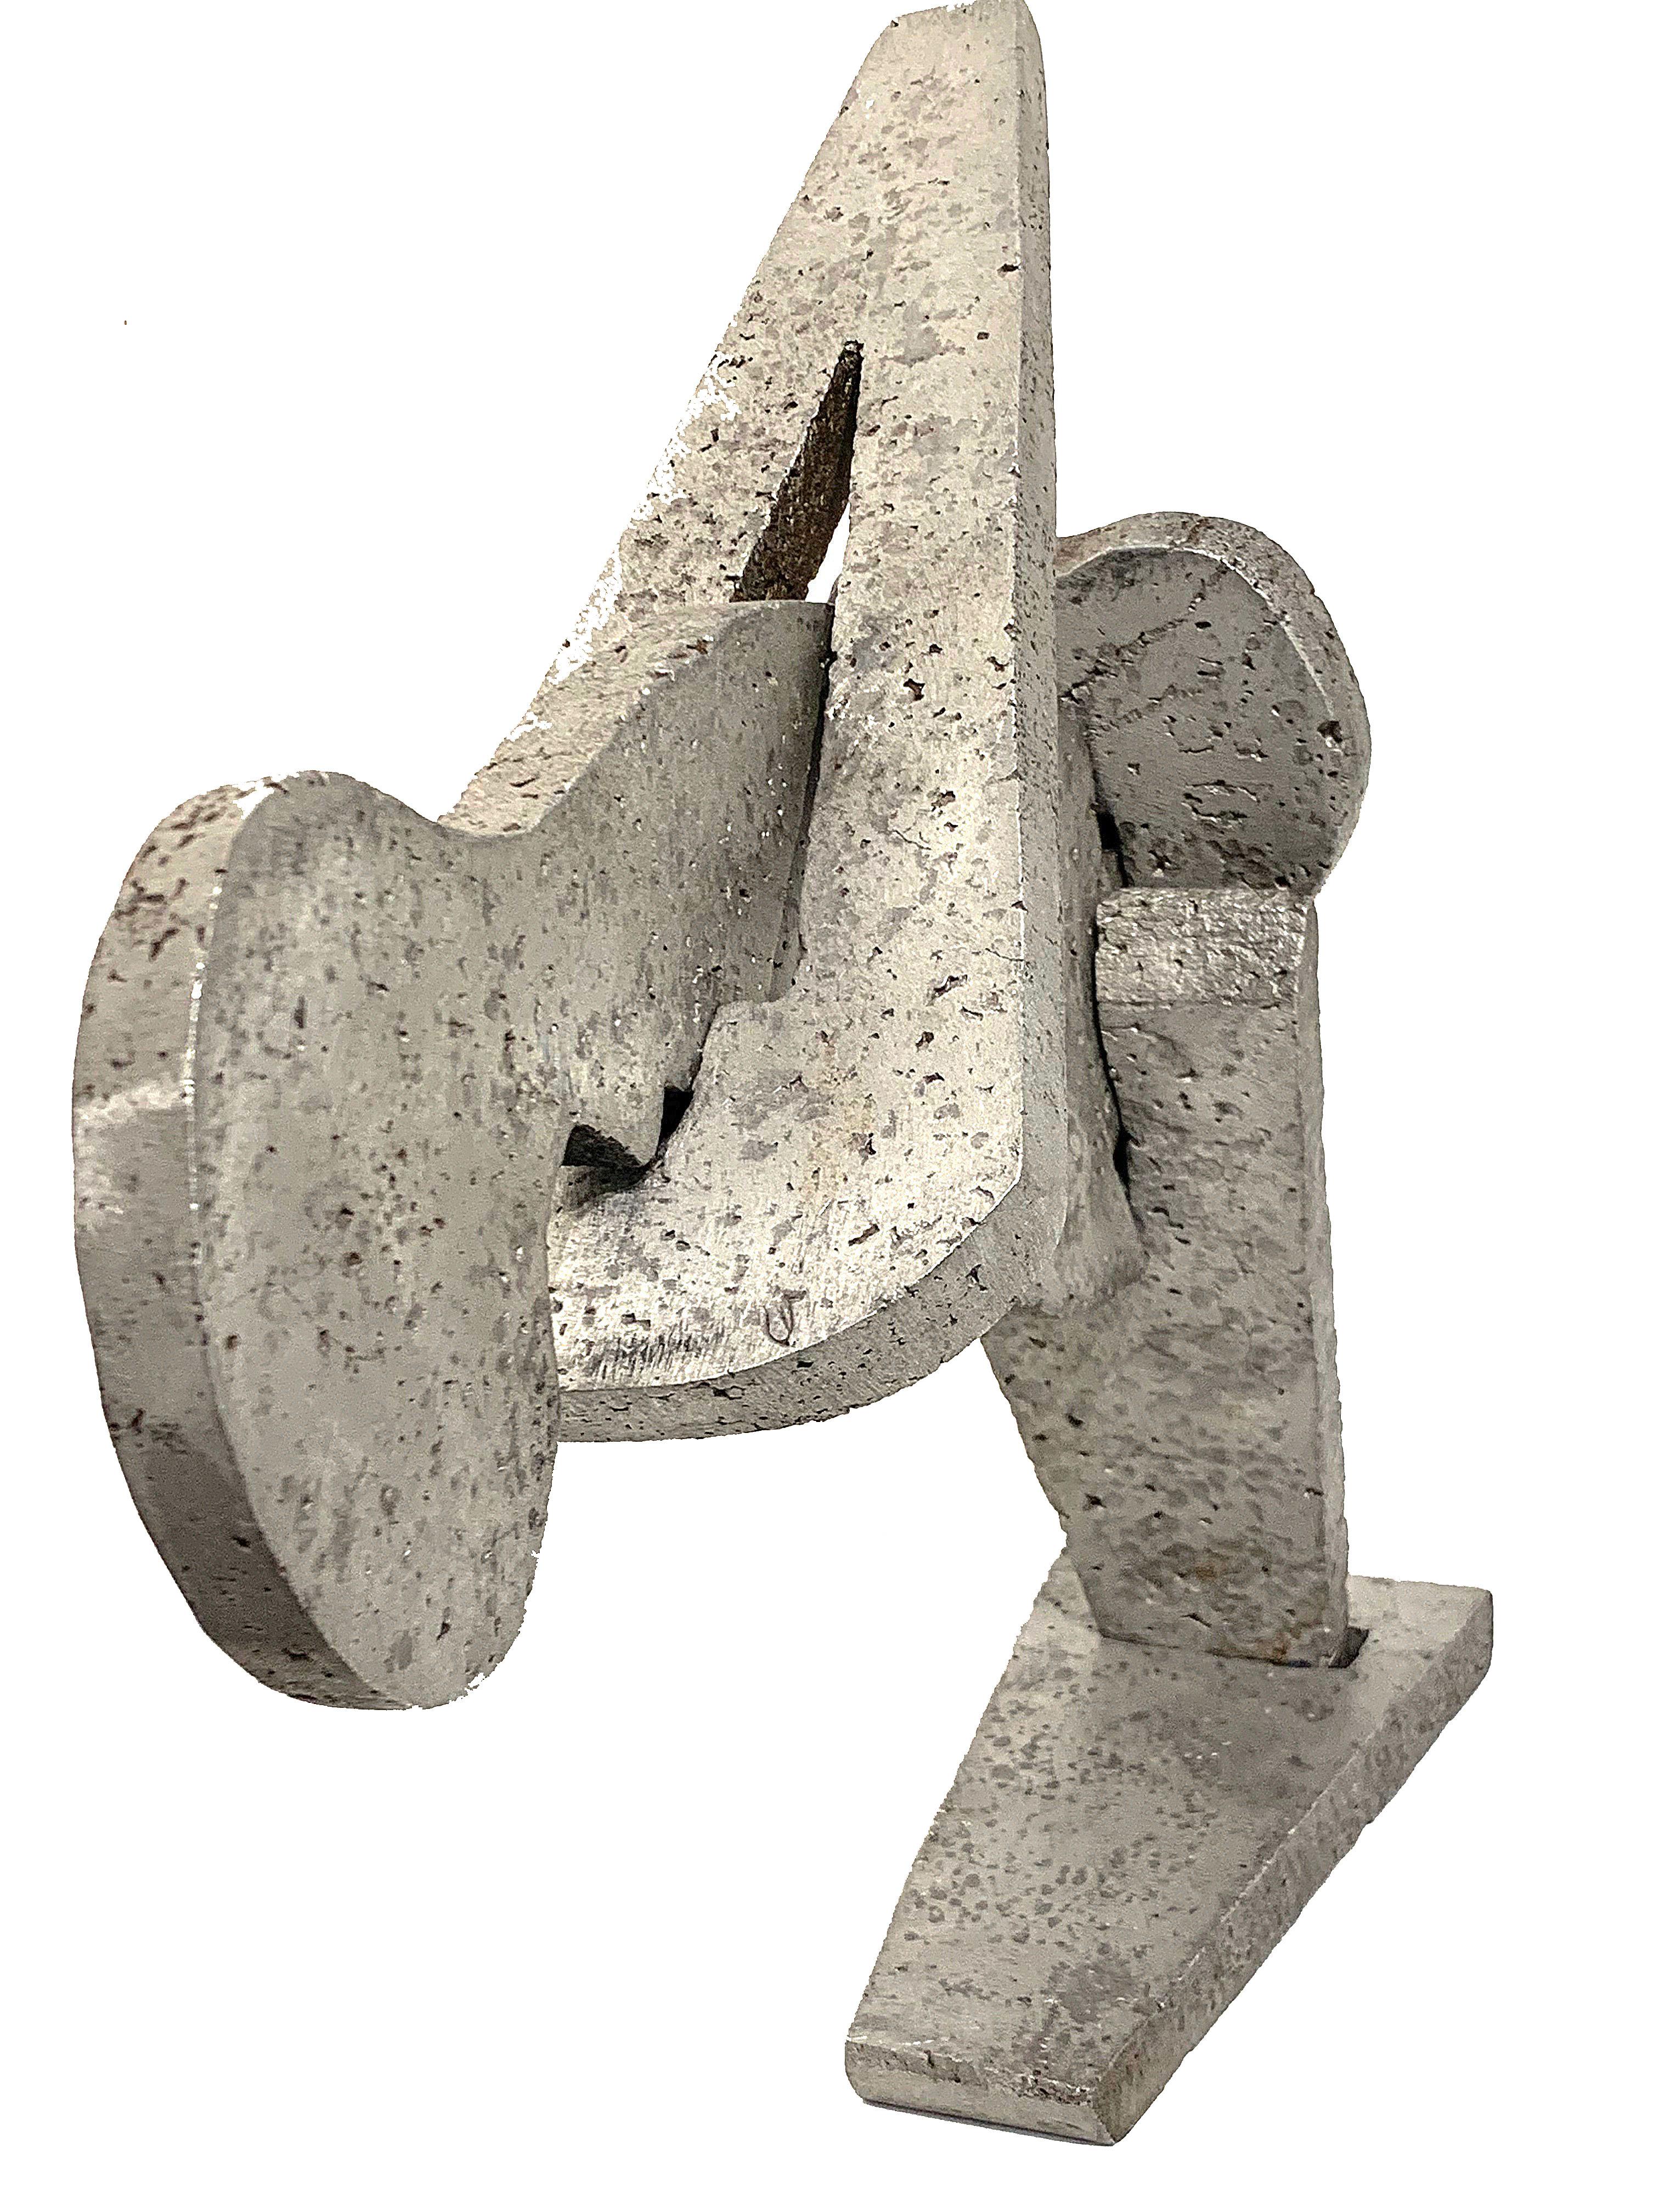 Cast aluminum puzzle bird sculpture. Depending on angle, could also be viewed as a swimmer (until one notices the tail). This piece should be placed in a location where won't be handled too much, as the pieces interlock loosely.